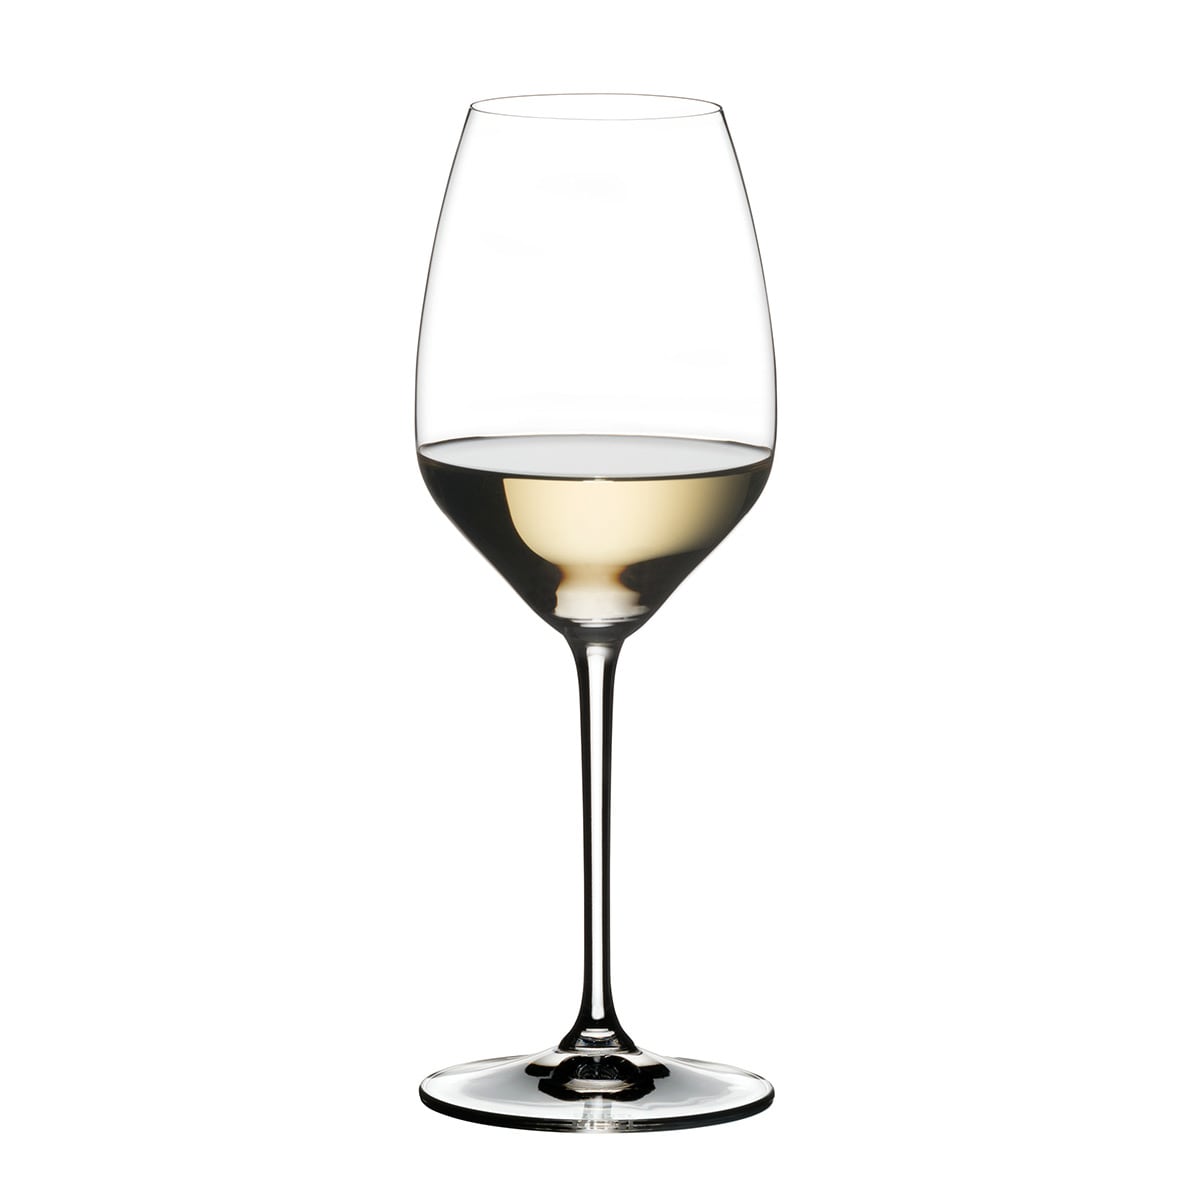 Personalized Riedel Wine Glasses, Riesling/White Wine - Set of 4 